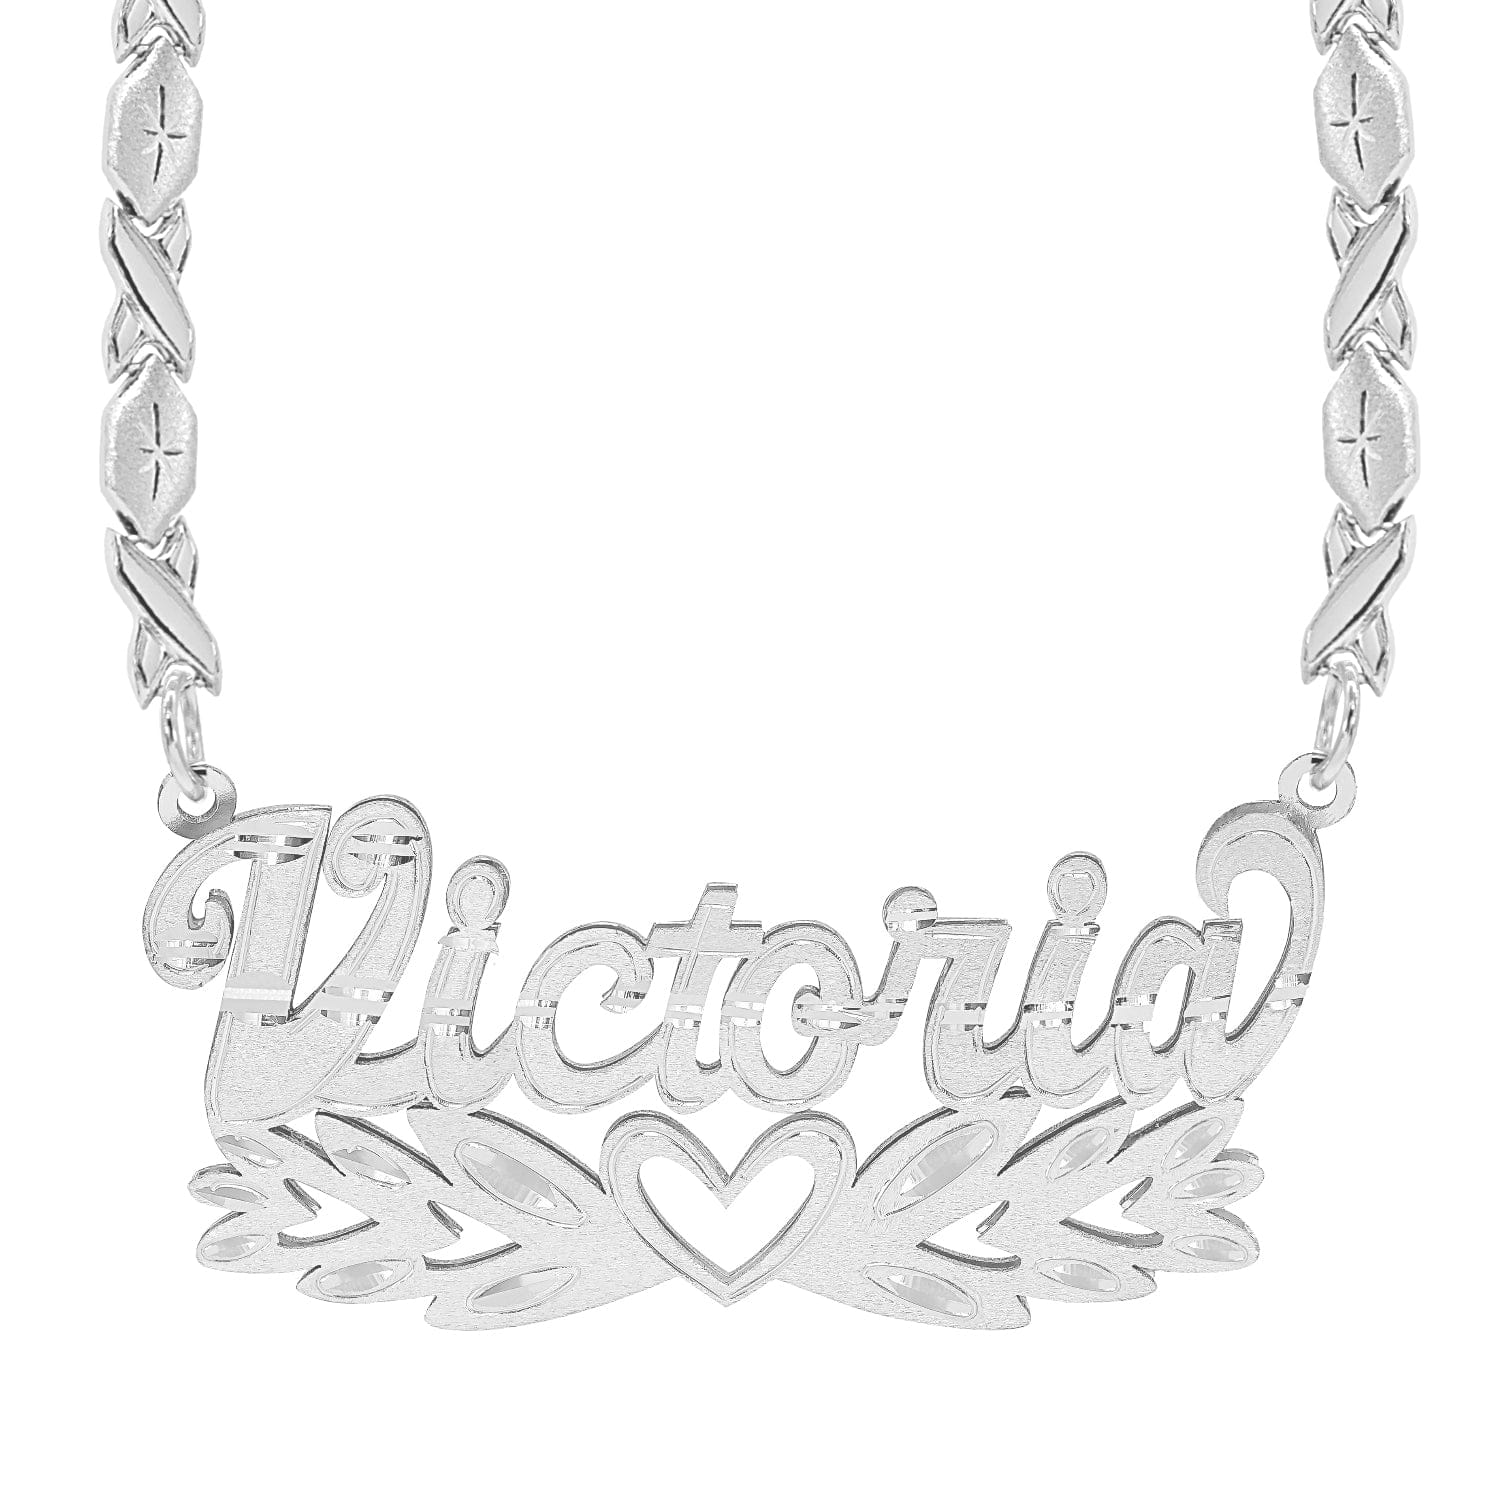 14K Gold over Sterling Silver / Xoxo Chain Double Nameplate Necklace "Victoria" with Xoxo Chain